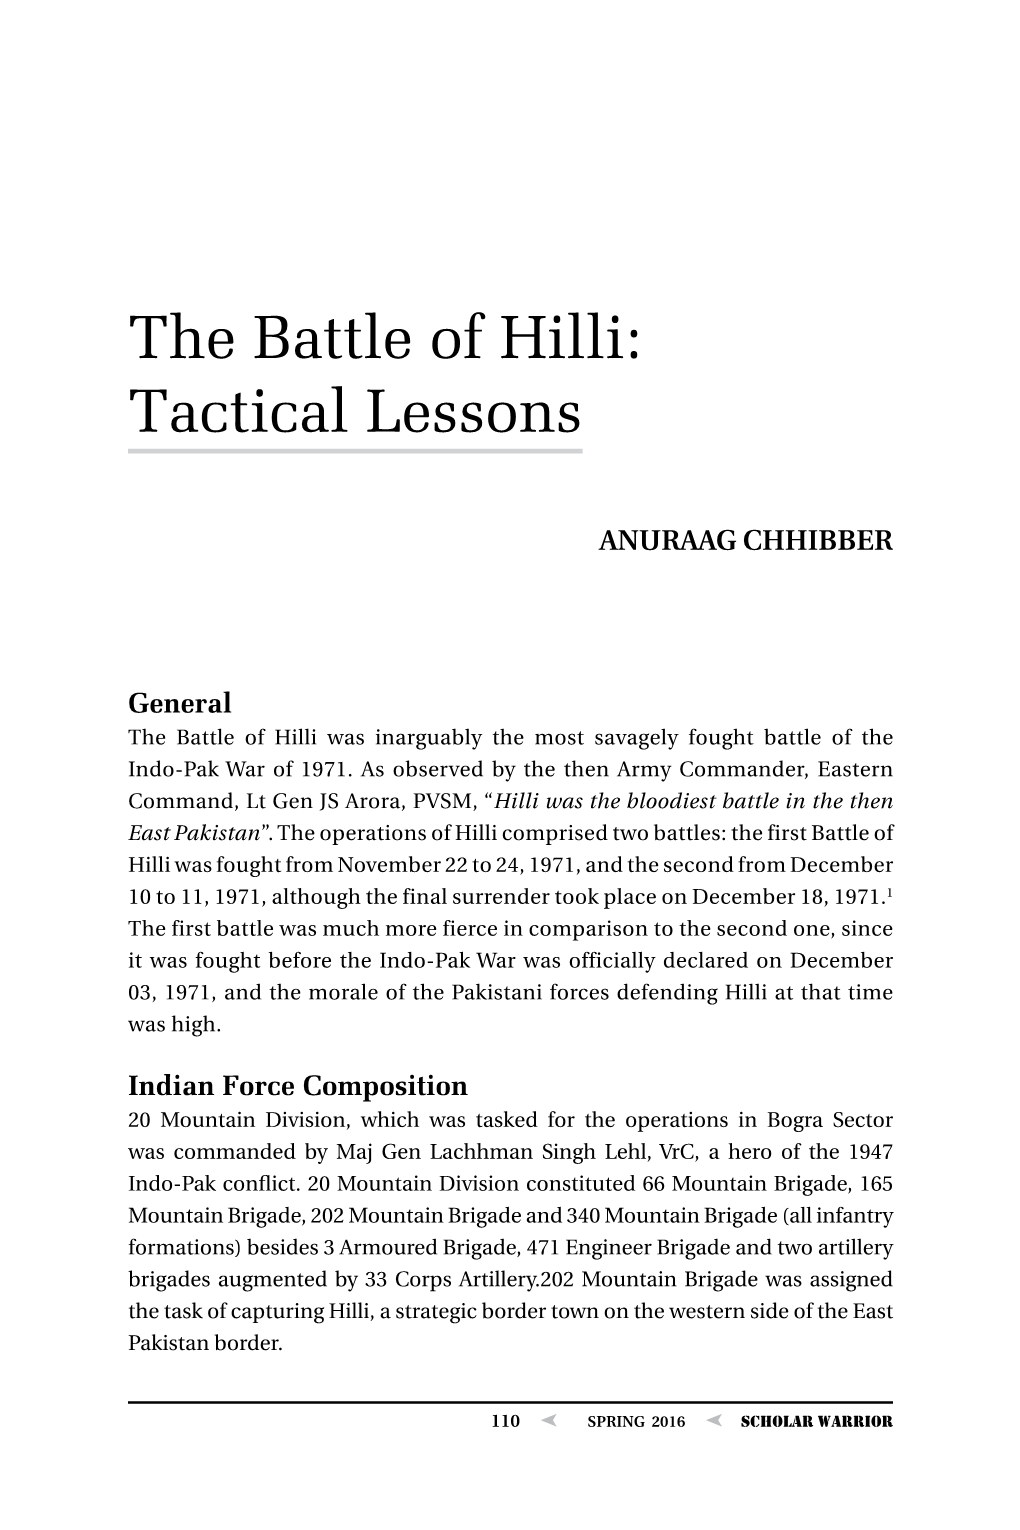 The Battle of Hilli: Tactical Lessons